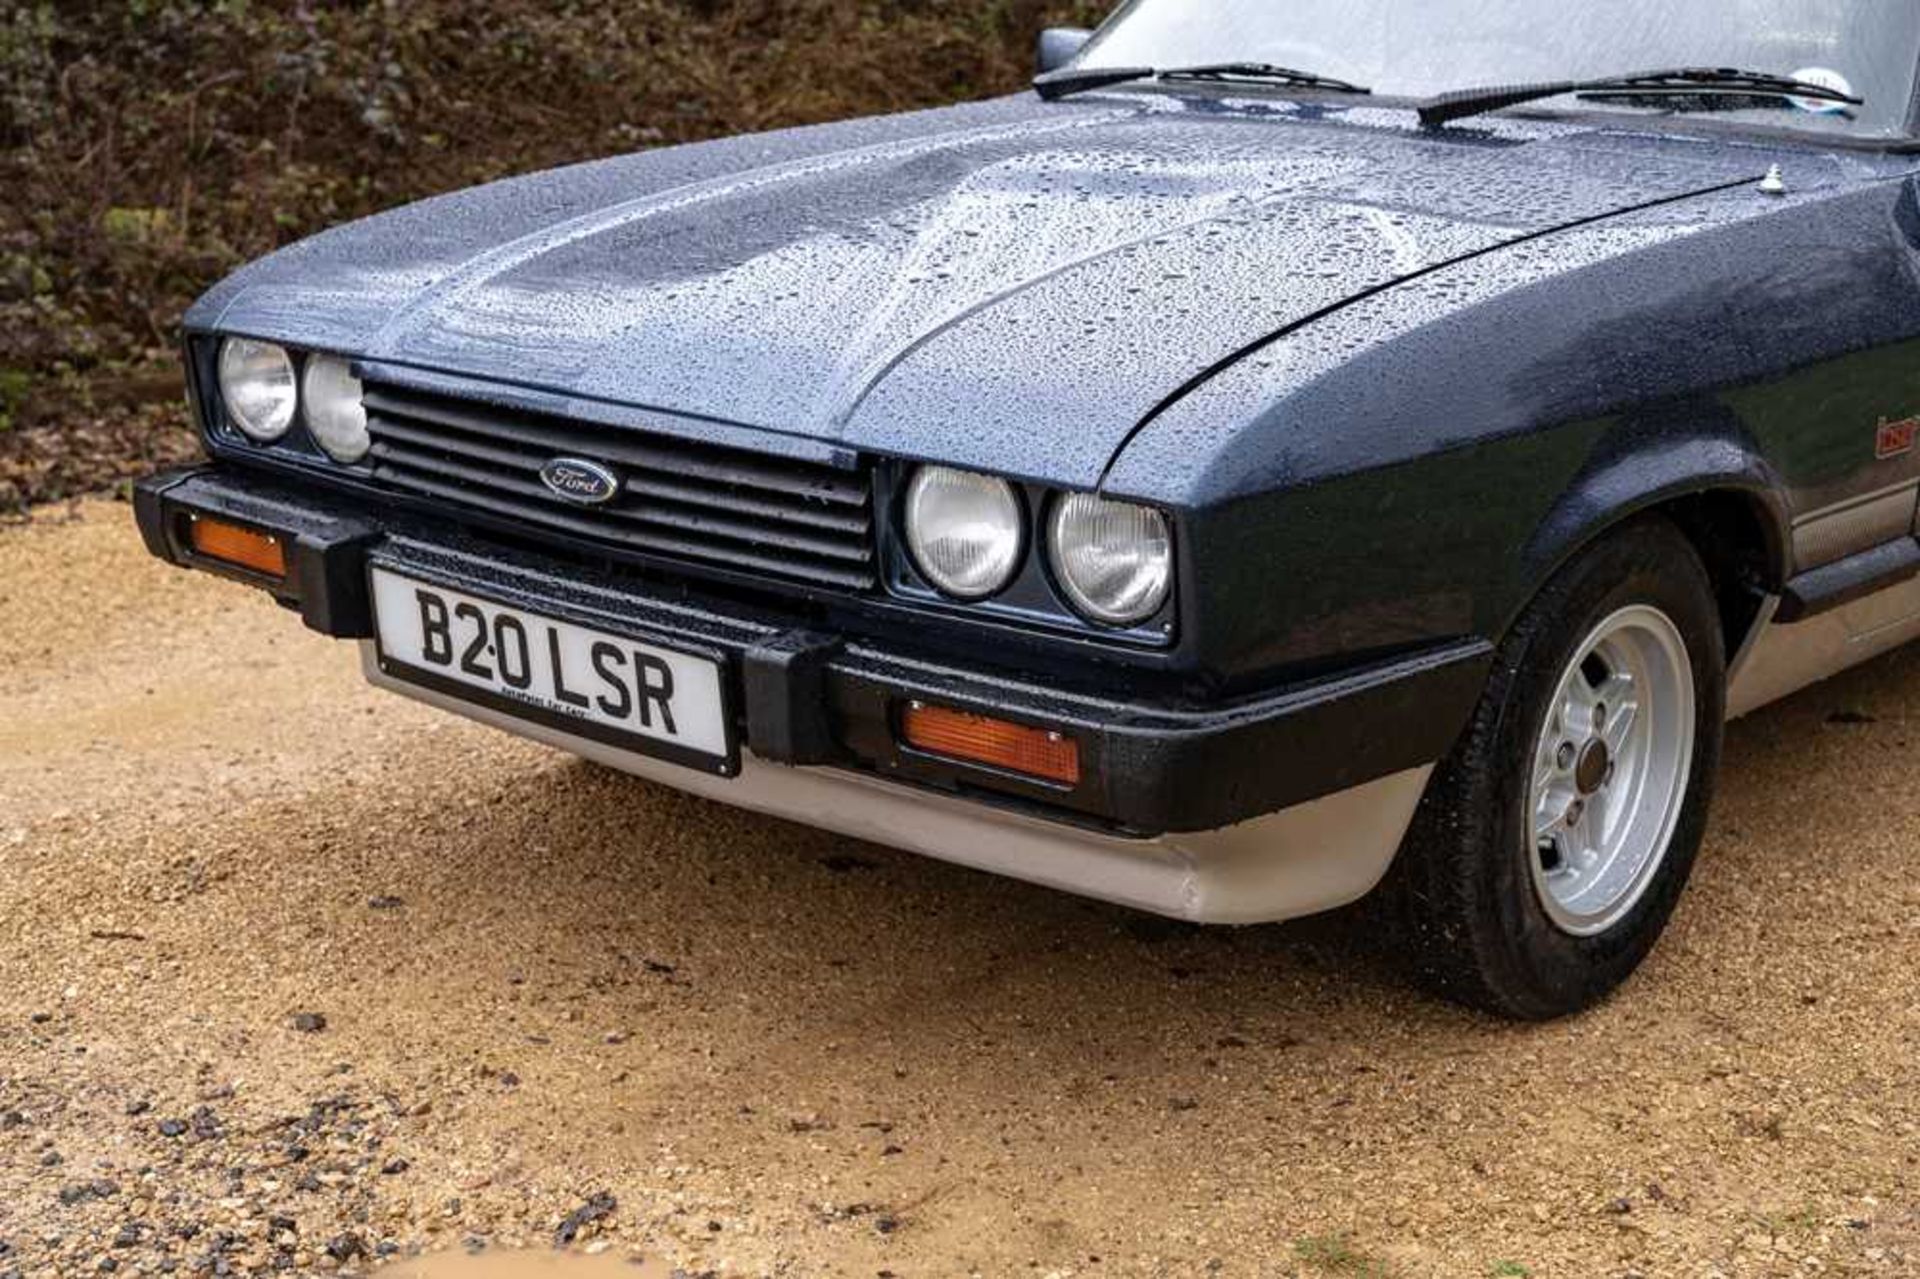 1985 Ford Capri Laser 2.0 Litre Warranted 55,300 miles from new - Image 13 of 67